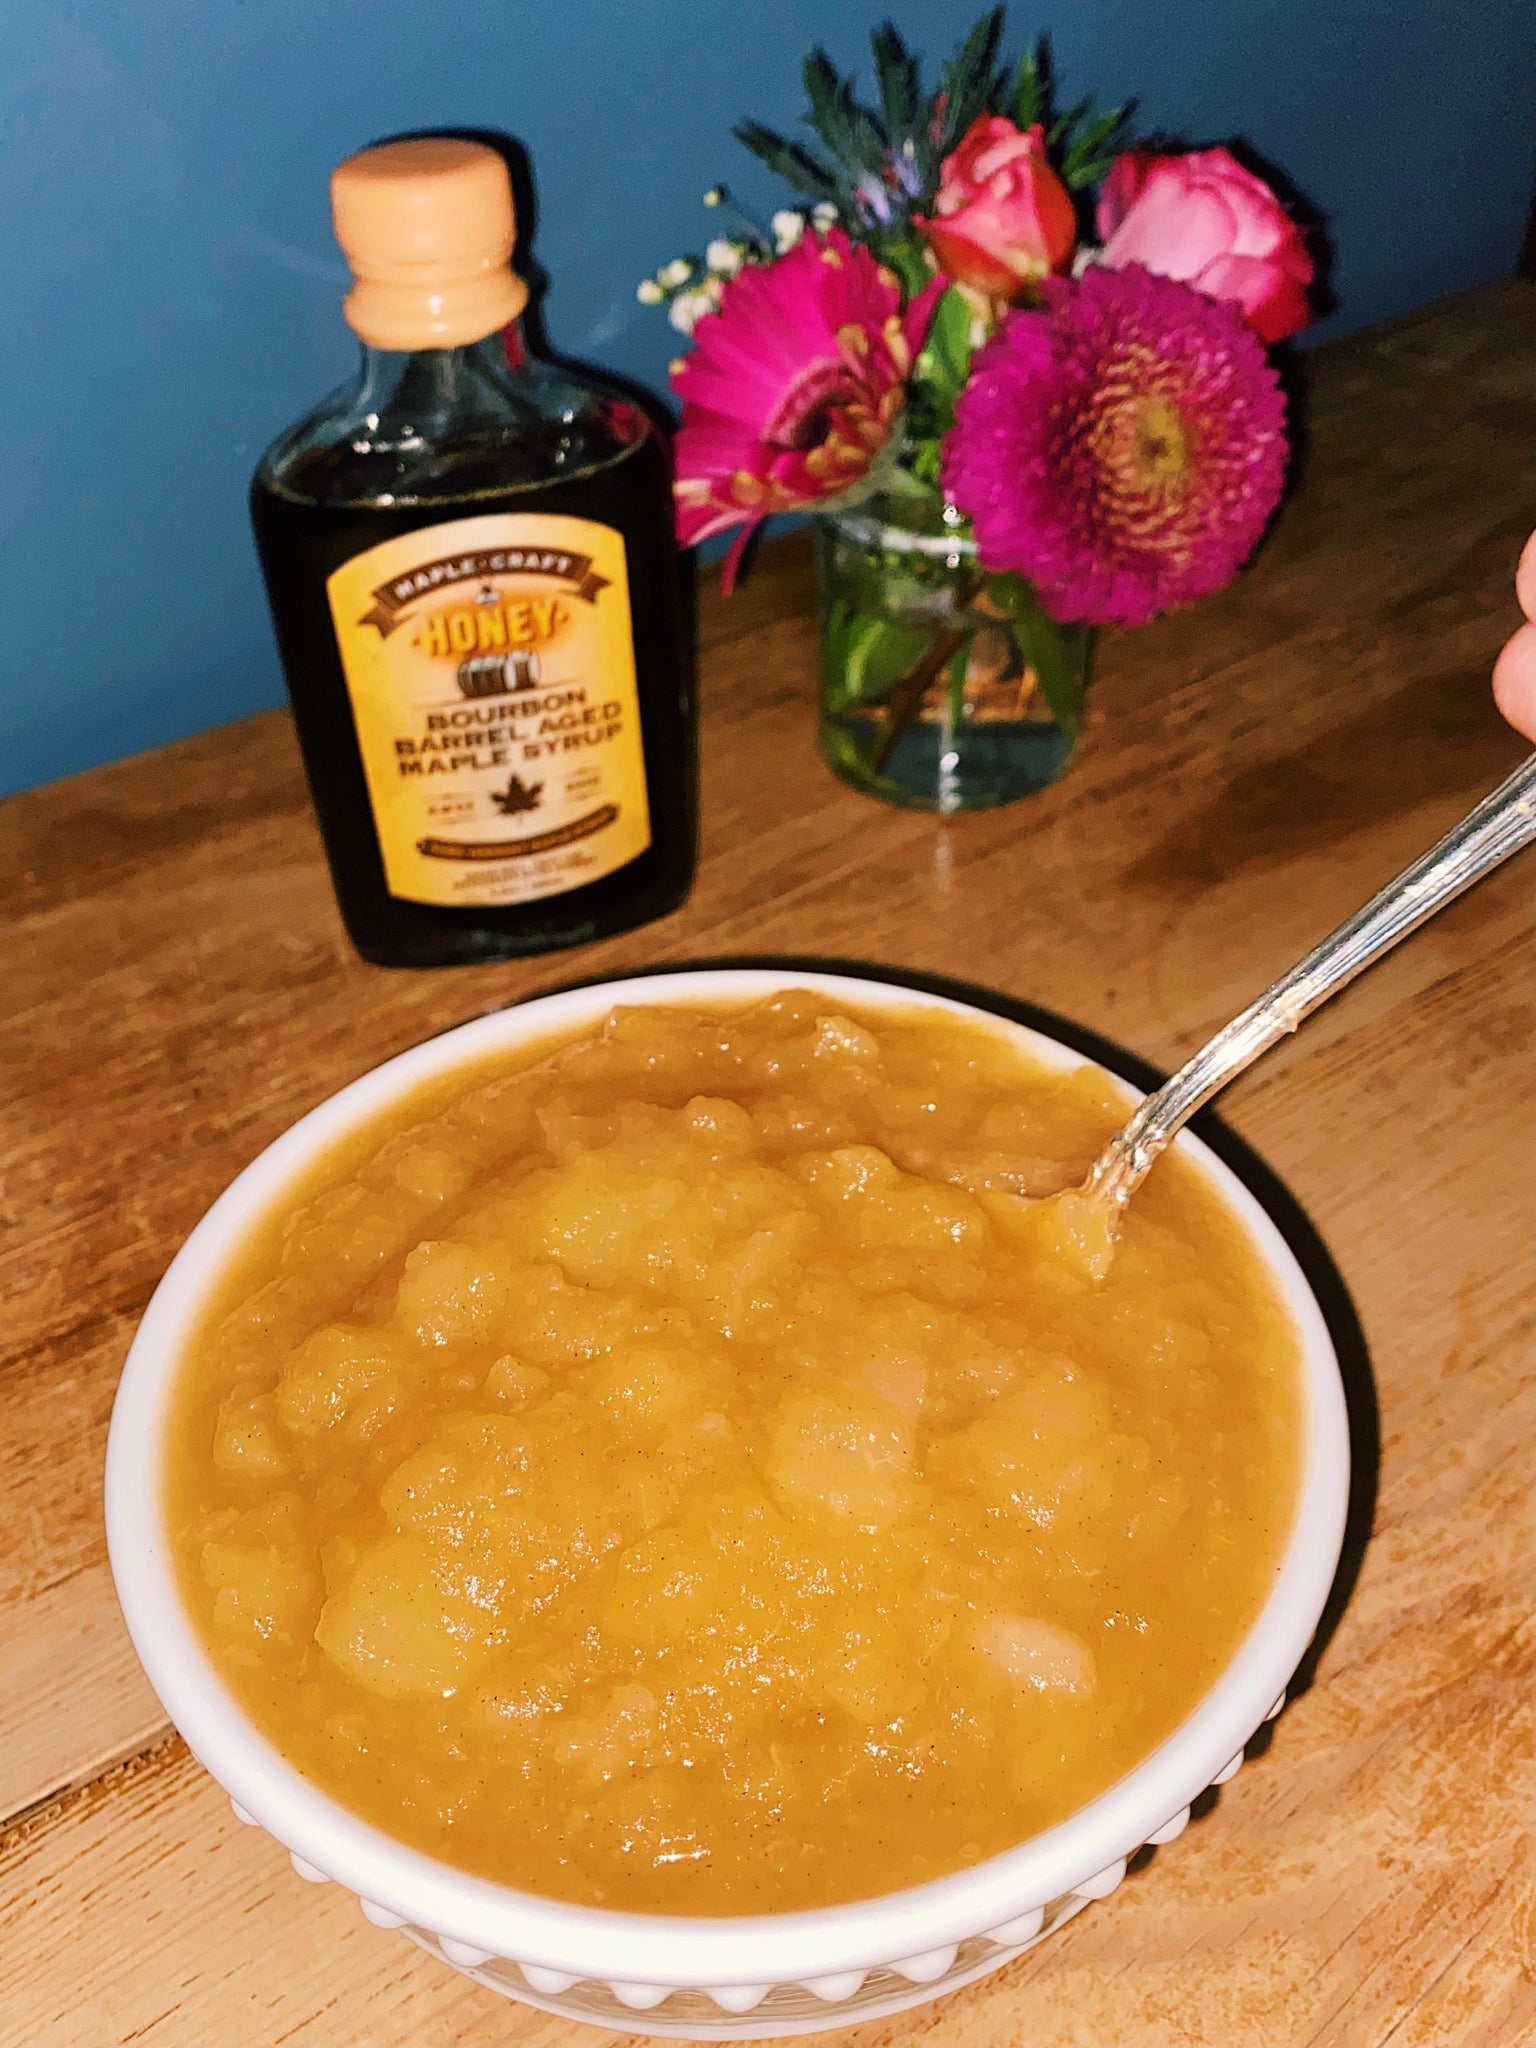 Maple-Crafted Apple Sauce